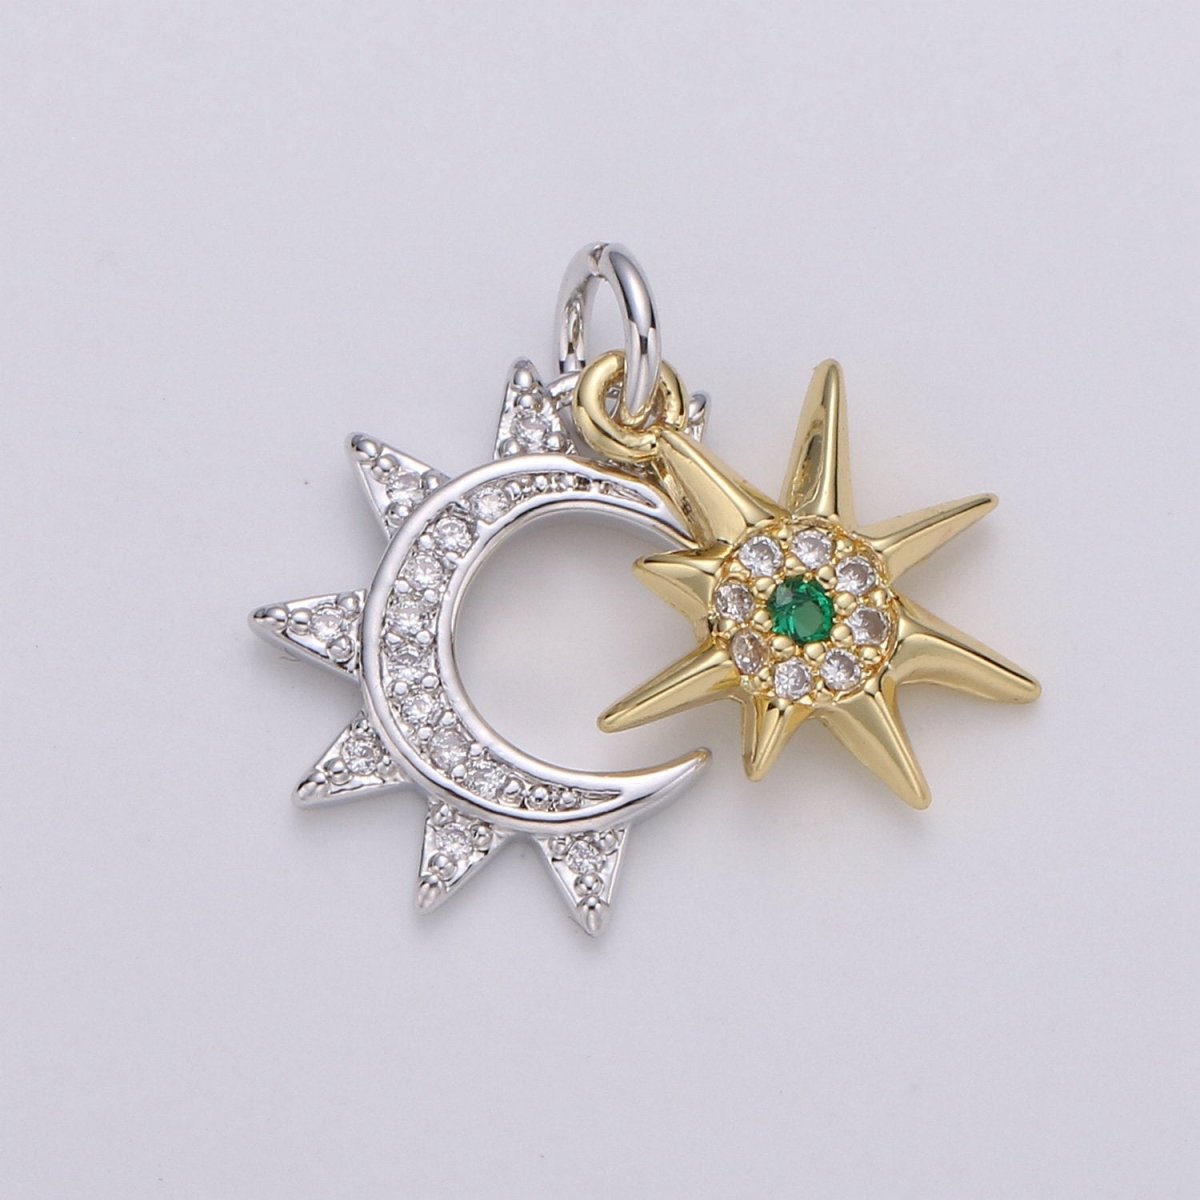 24K Gold Filled Moon Charm, Crescent Moon Pendant, Micro Pave Star Necklace, Dainty Gold Celestial Jewelry Making Supply Aurora Necklace D-446 - D-449 - DLUXCA